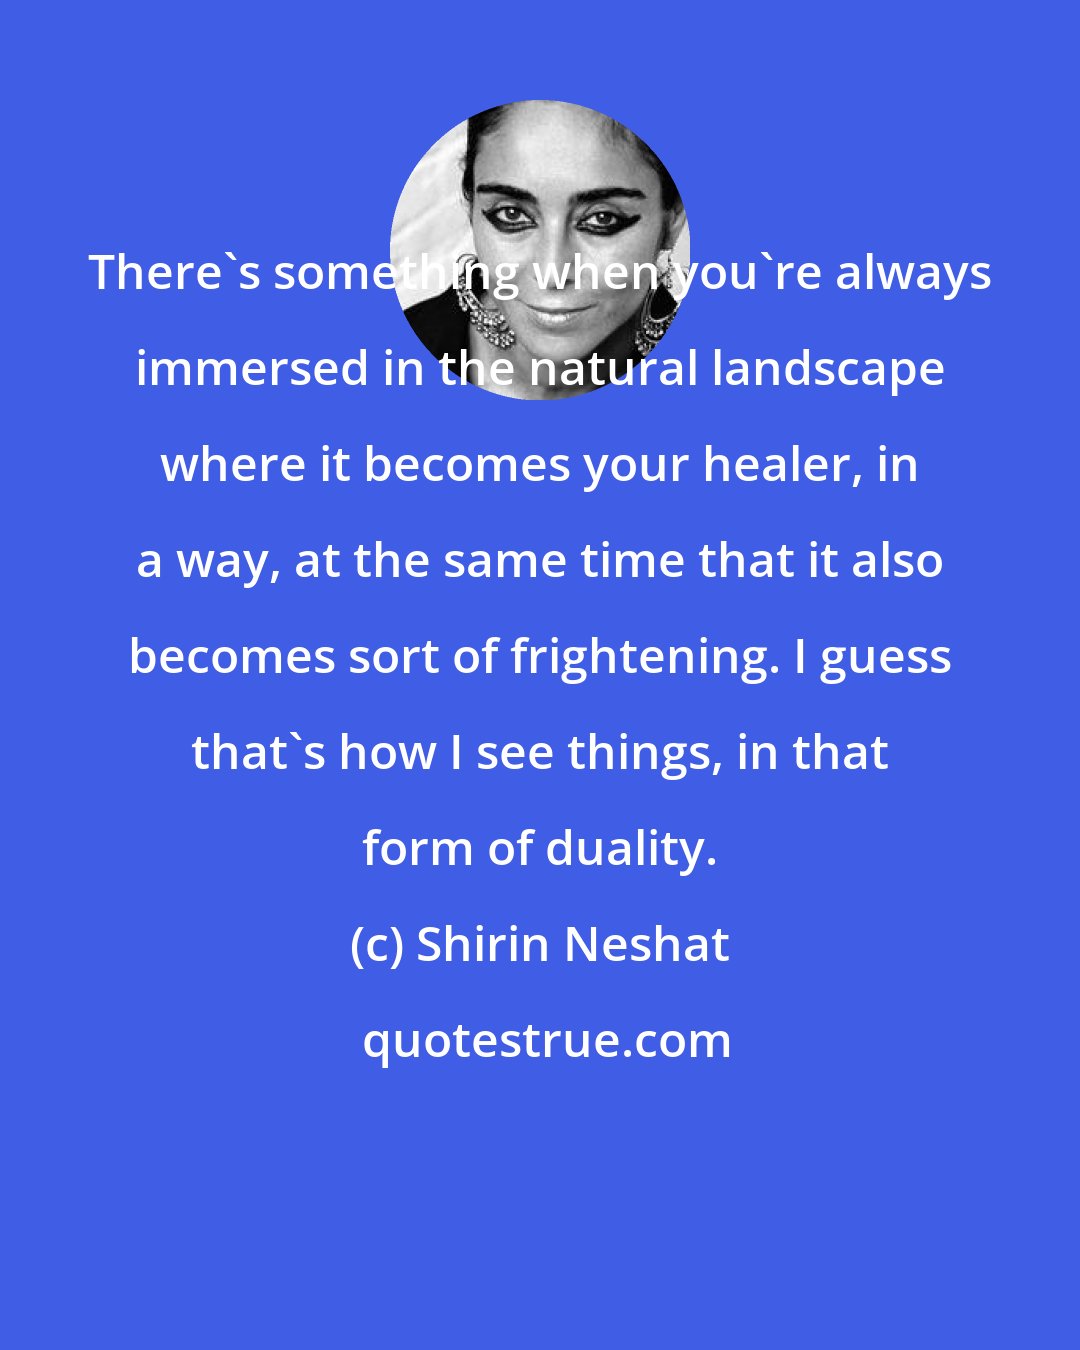 Shirin Neshat: There's something when you're always immersed in the natural landscape where it becomes your healer, in a way, at the same time that it also becomes sort of frightening. I guess that's how I see things, in that form of duality.